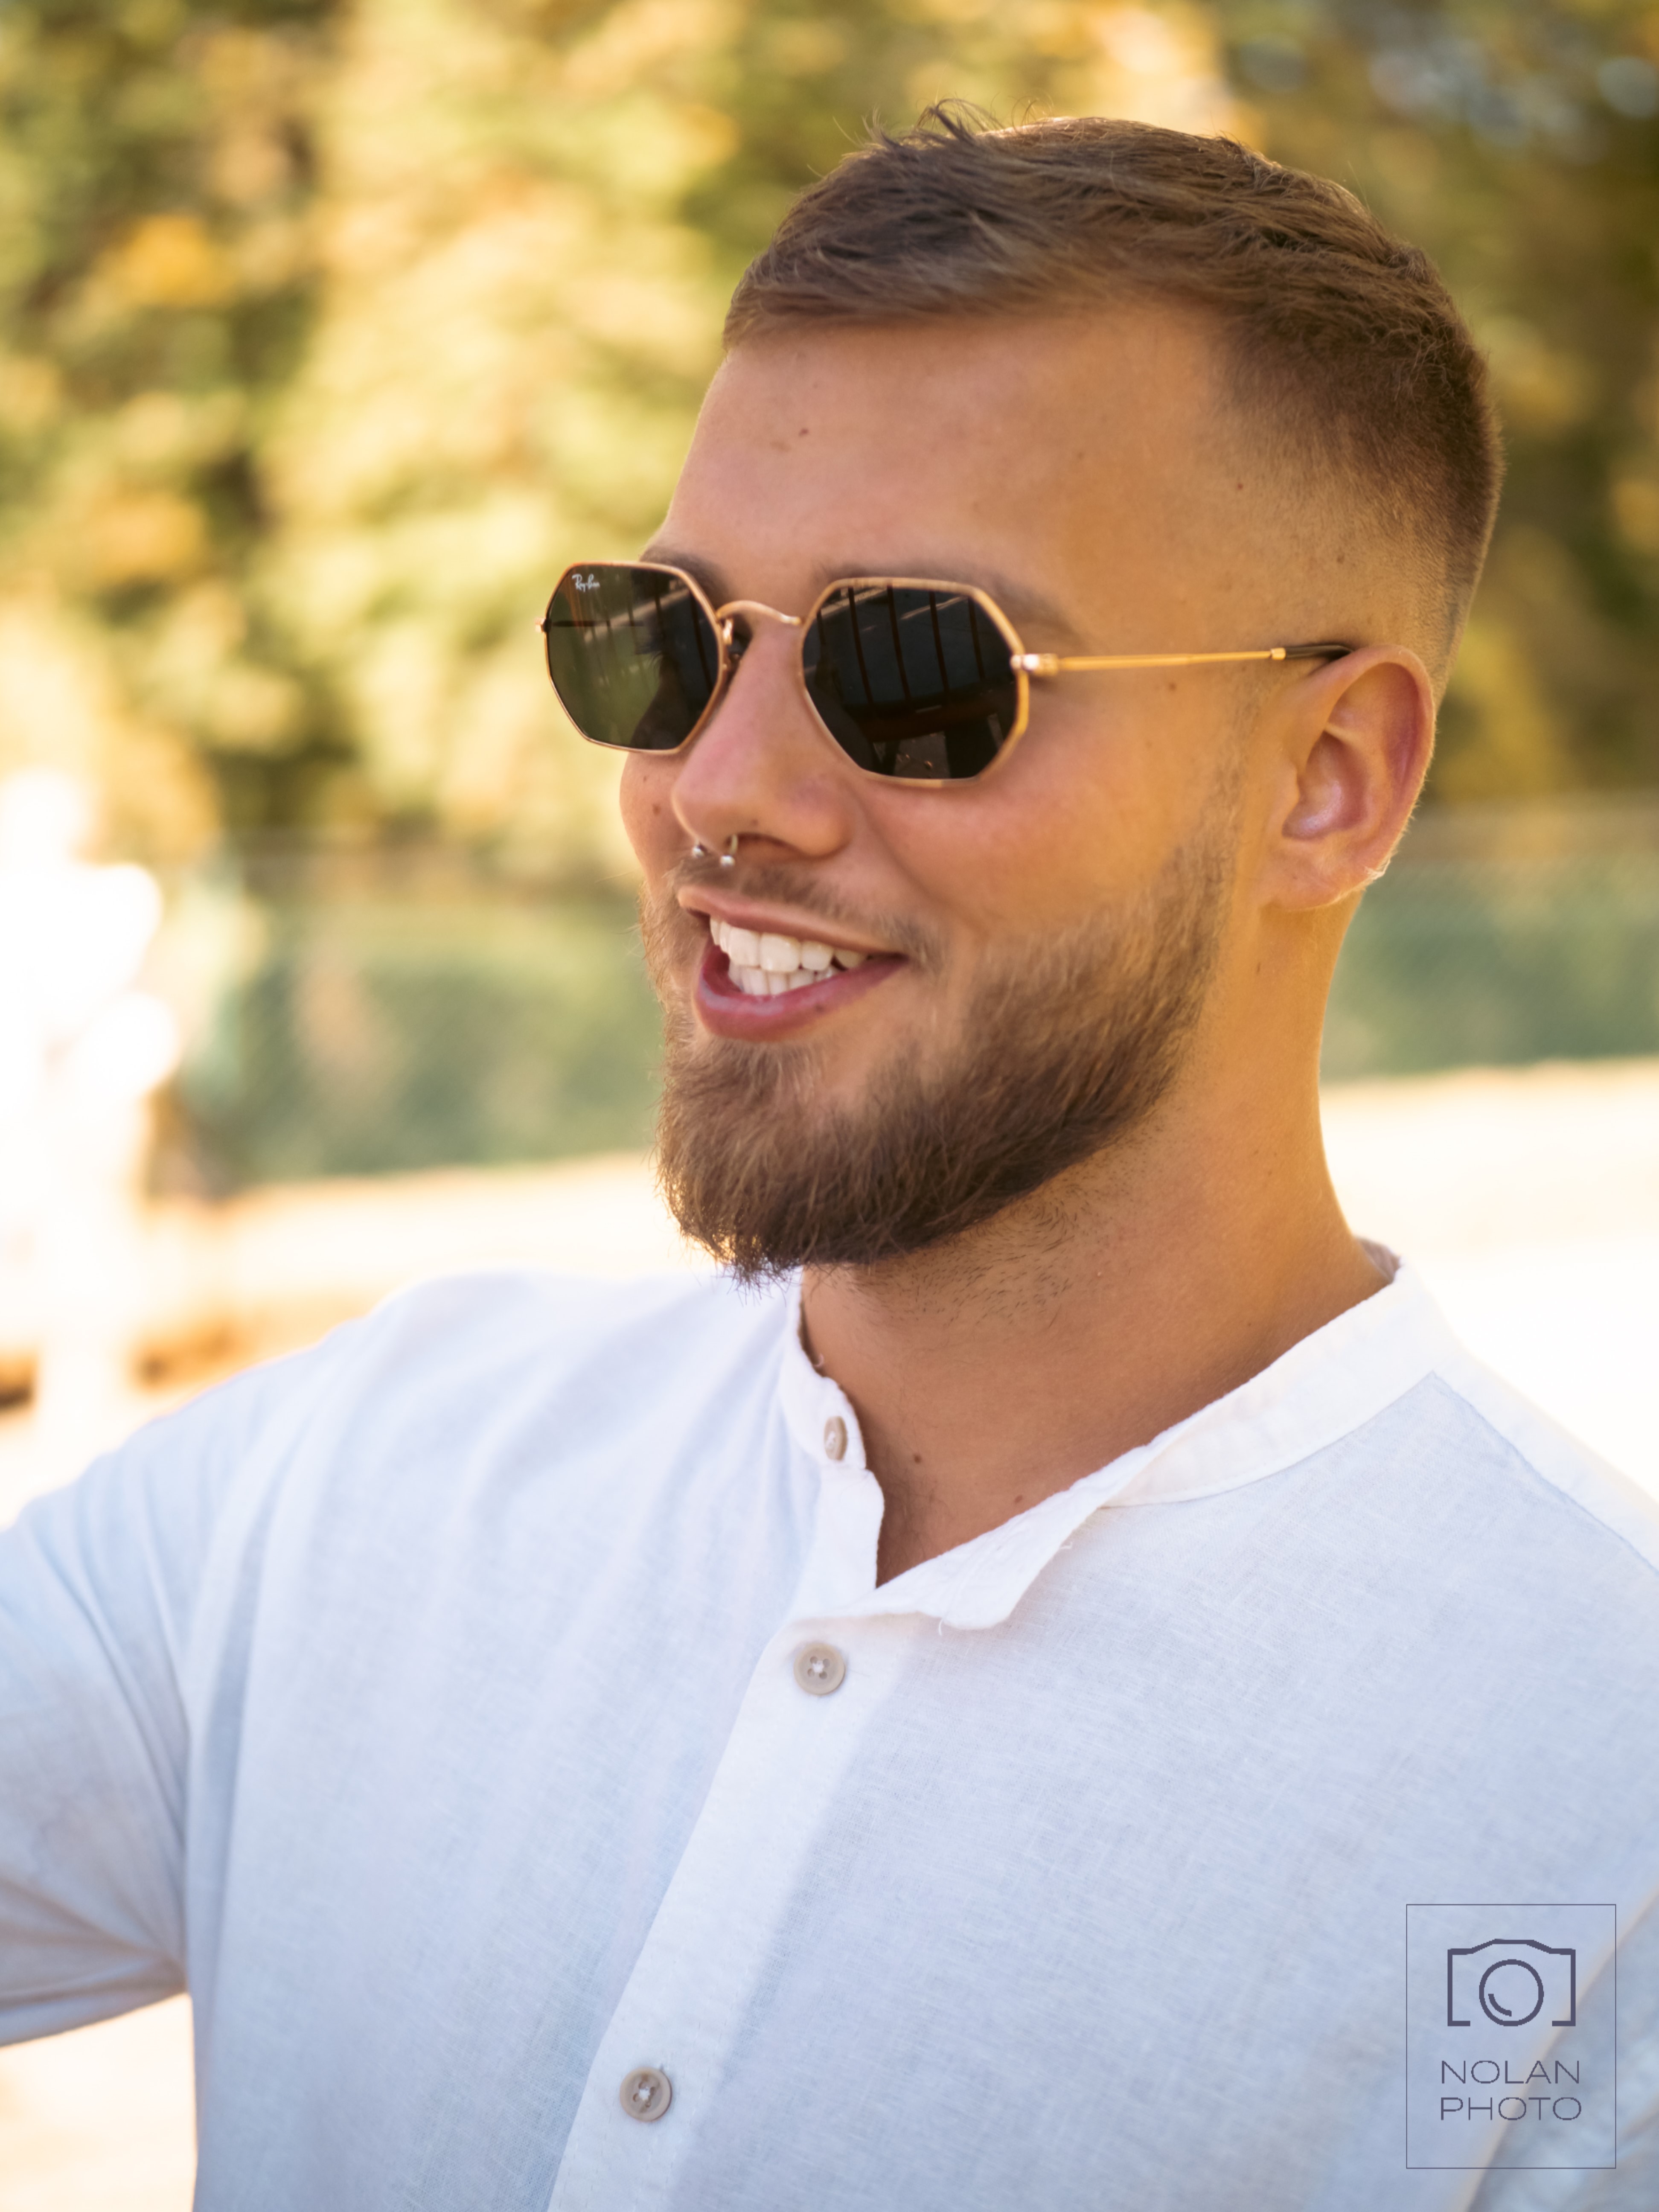 A Portrait of a Guy, wearing a white shirt and funky glasses